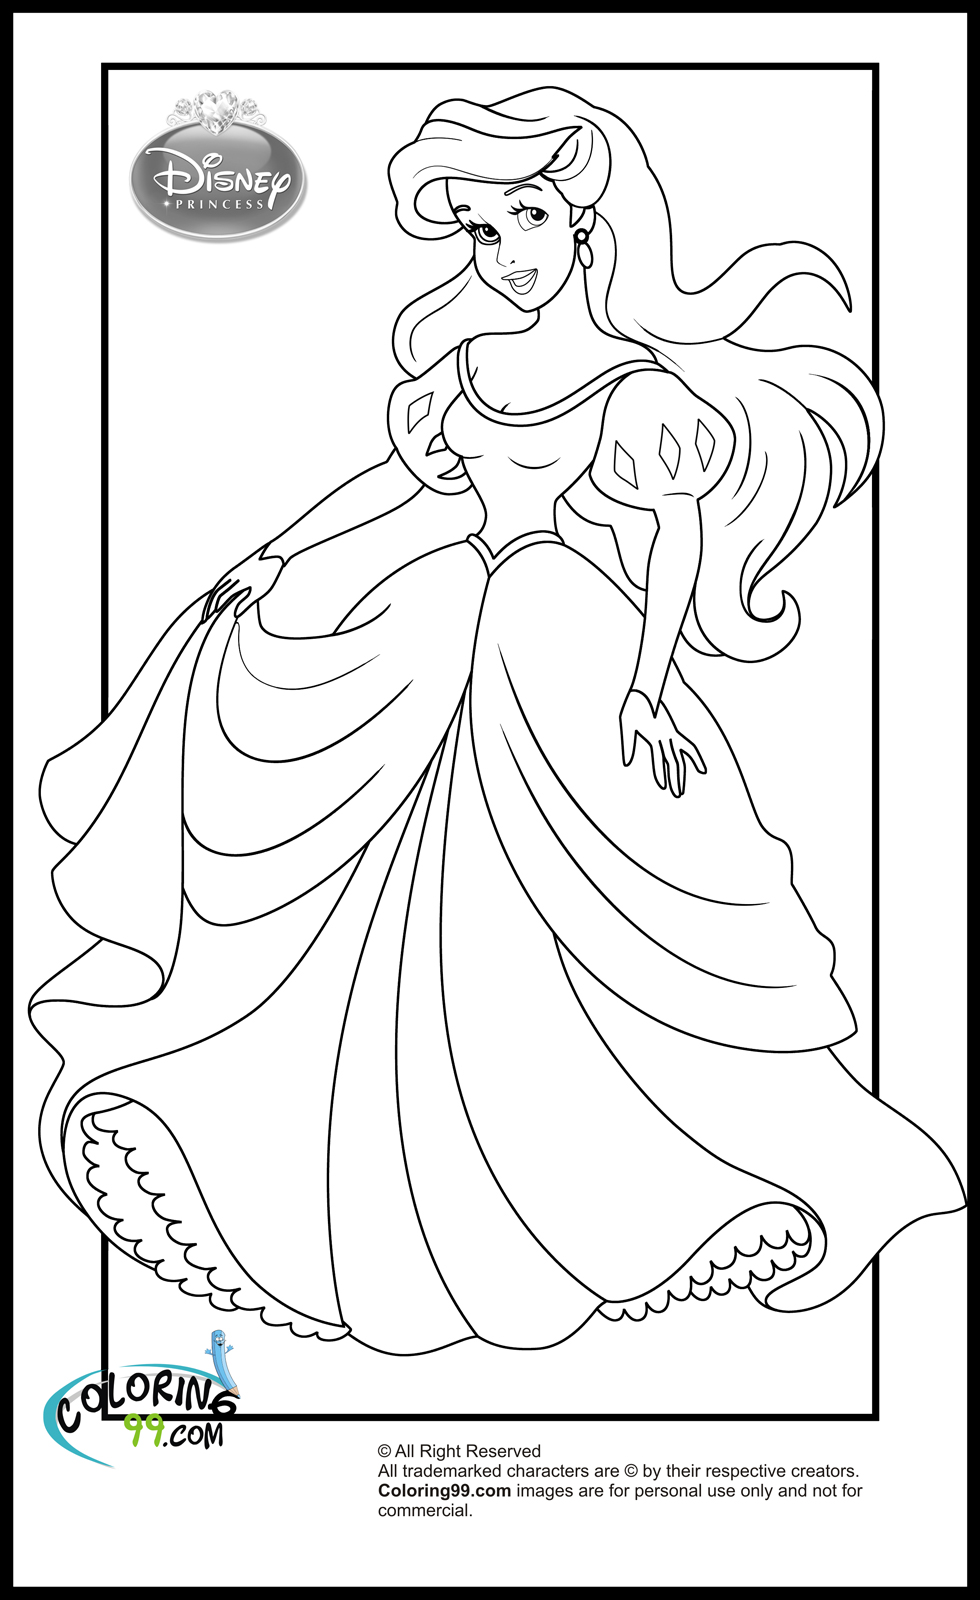 Disney Princess Coloring Pages Team Colors BEDECOR Free Coloring Picture wallpaper give a chance to color on the wall without getting in trouble! Fill the walls of your home or office with stress-relieving [bedroomdecorz.blogspot.com]